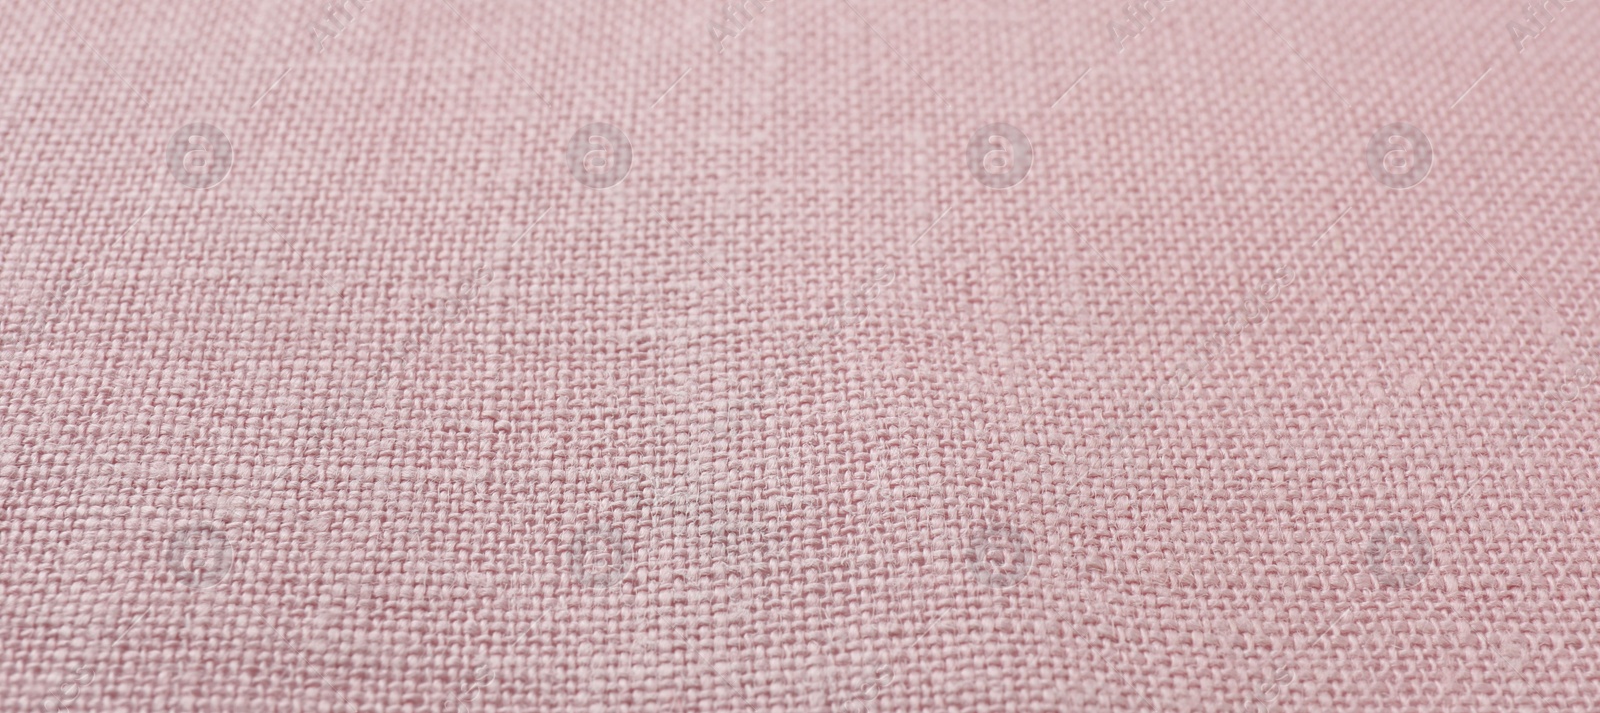 Photo of Texture of pink fabric as background, closeup